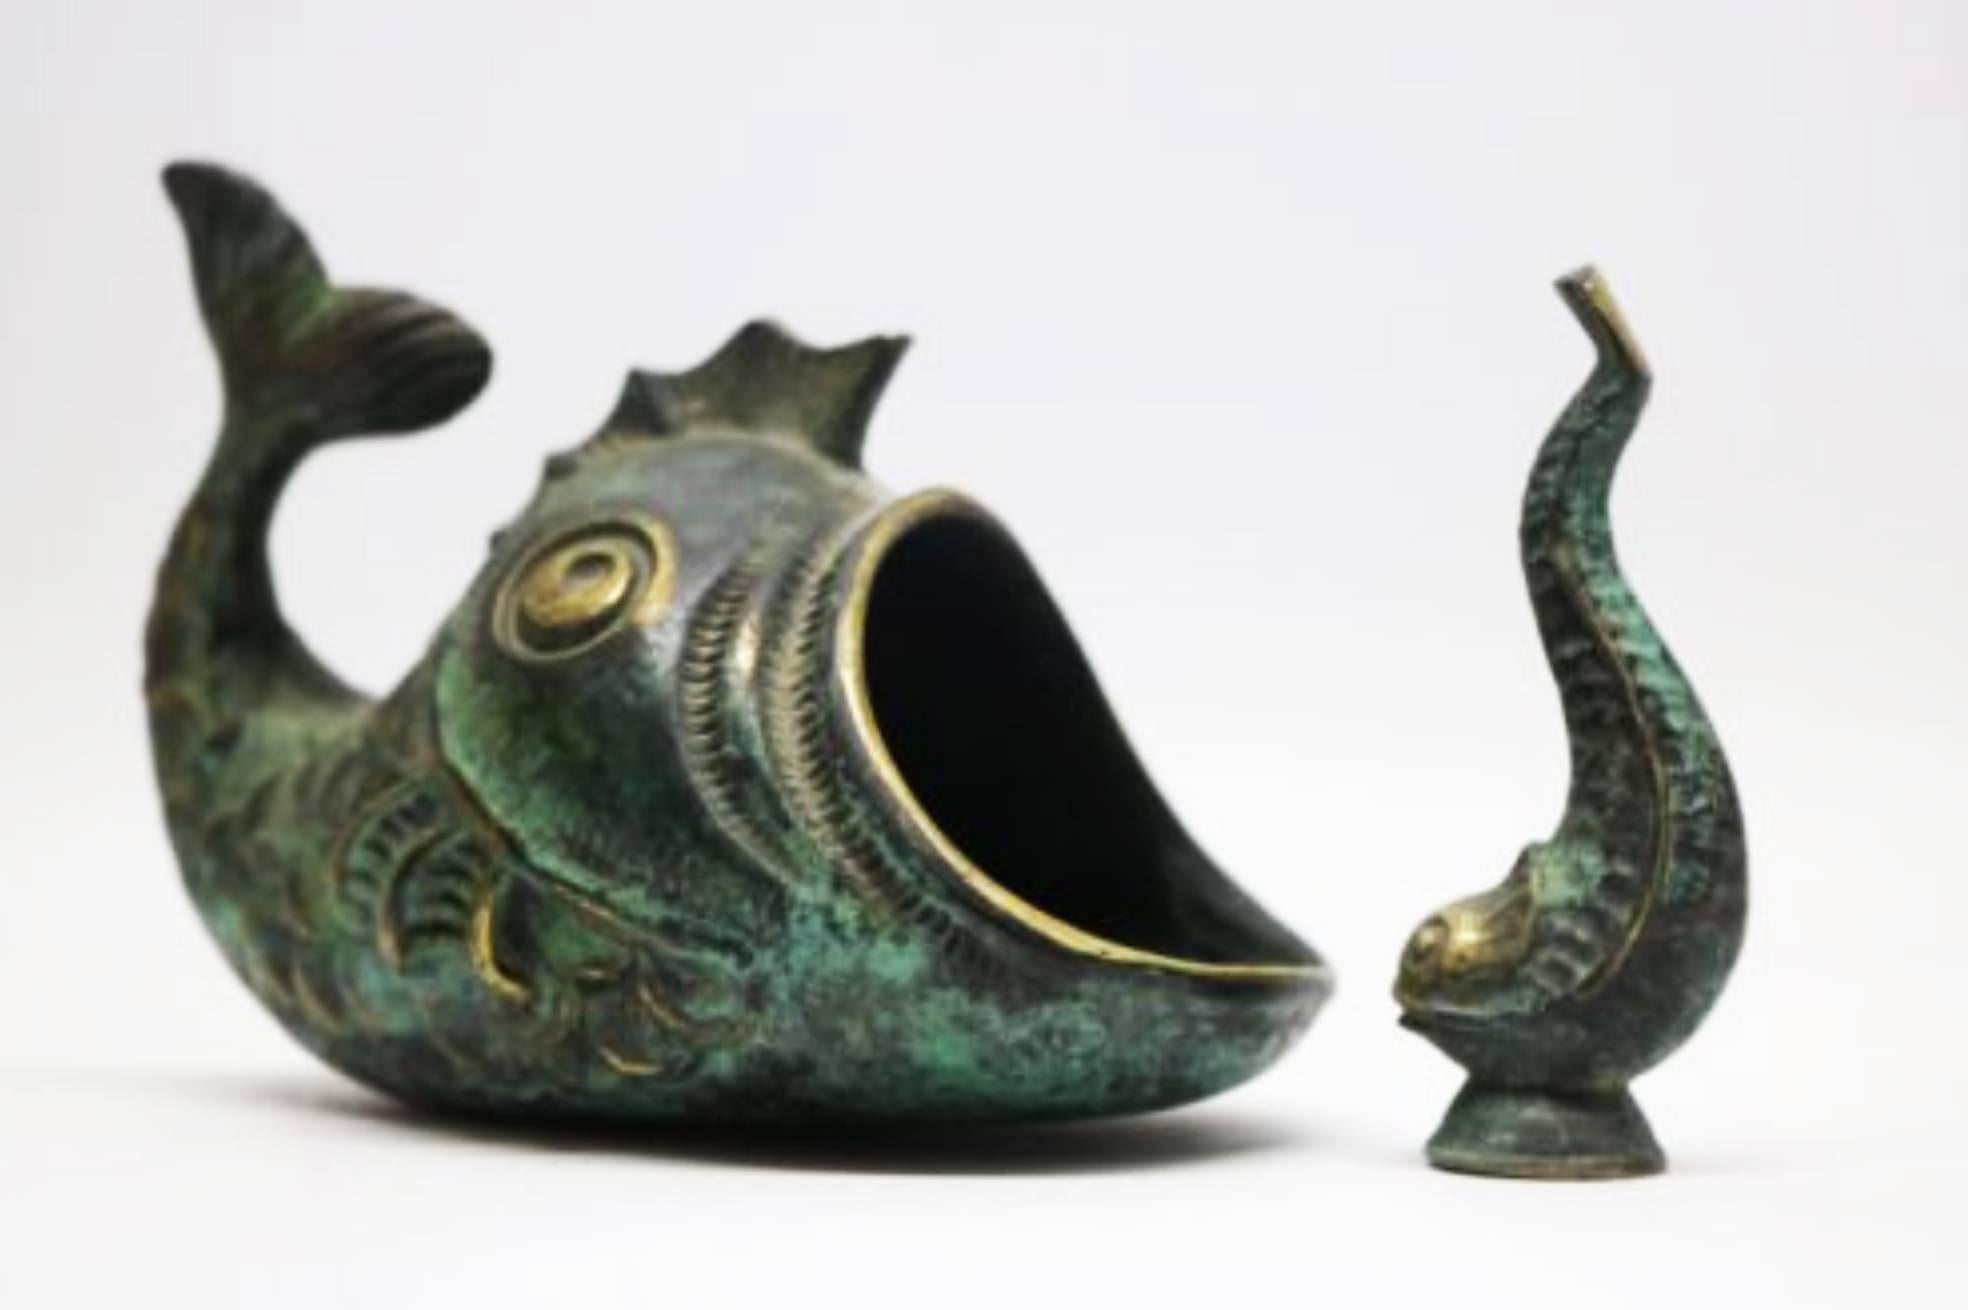 Cast brass blackened by Walter Bosse designed for Hagenauer in the 1950s.
Both in a form of a fish.
Excellent original condition.